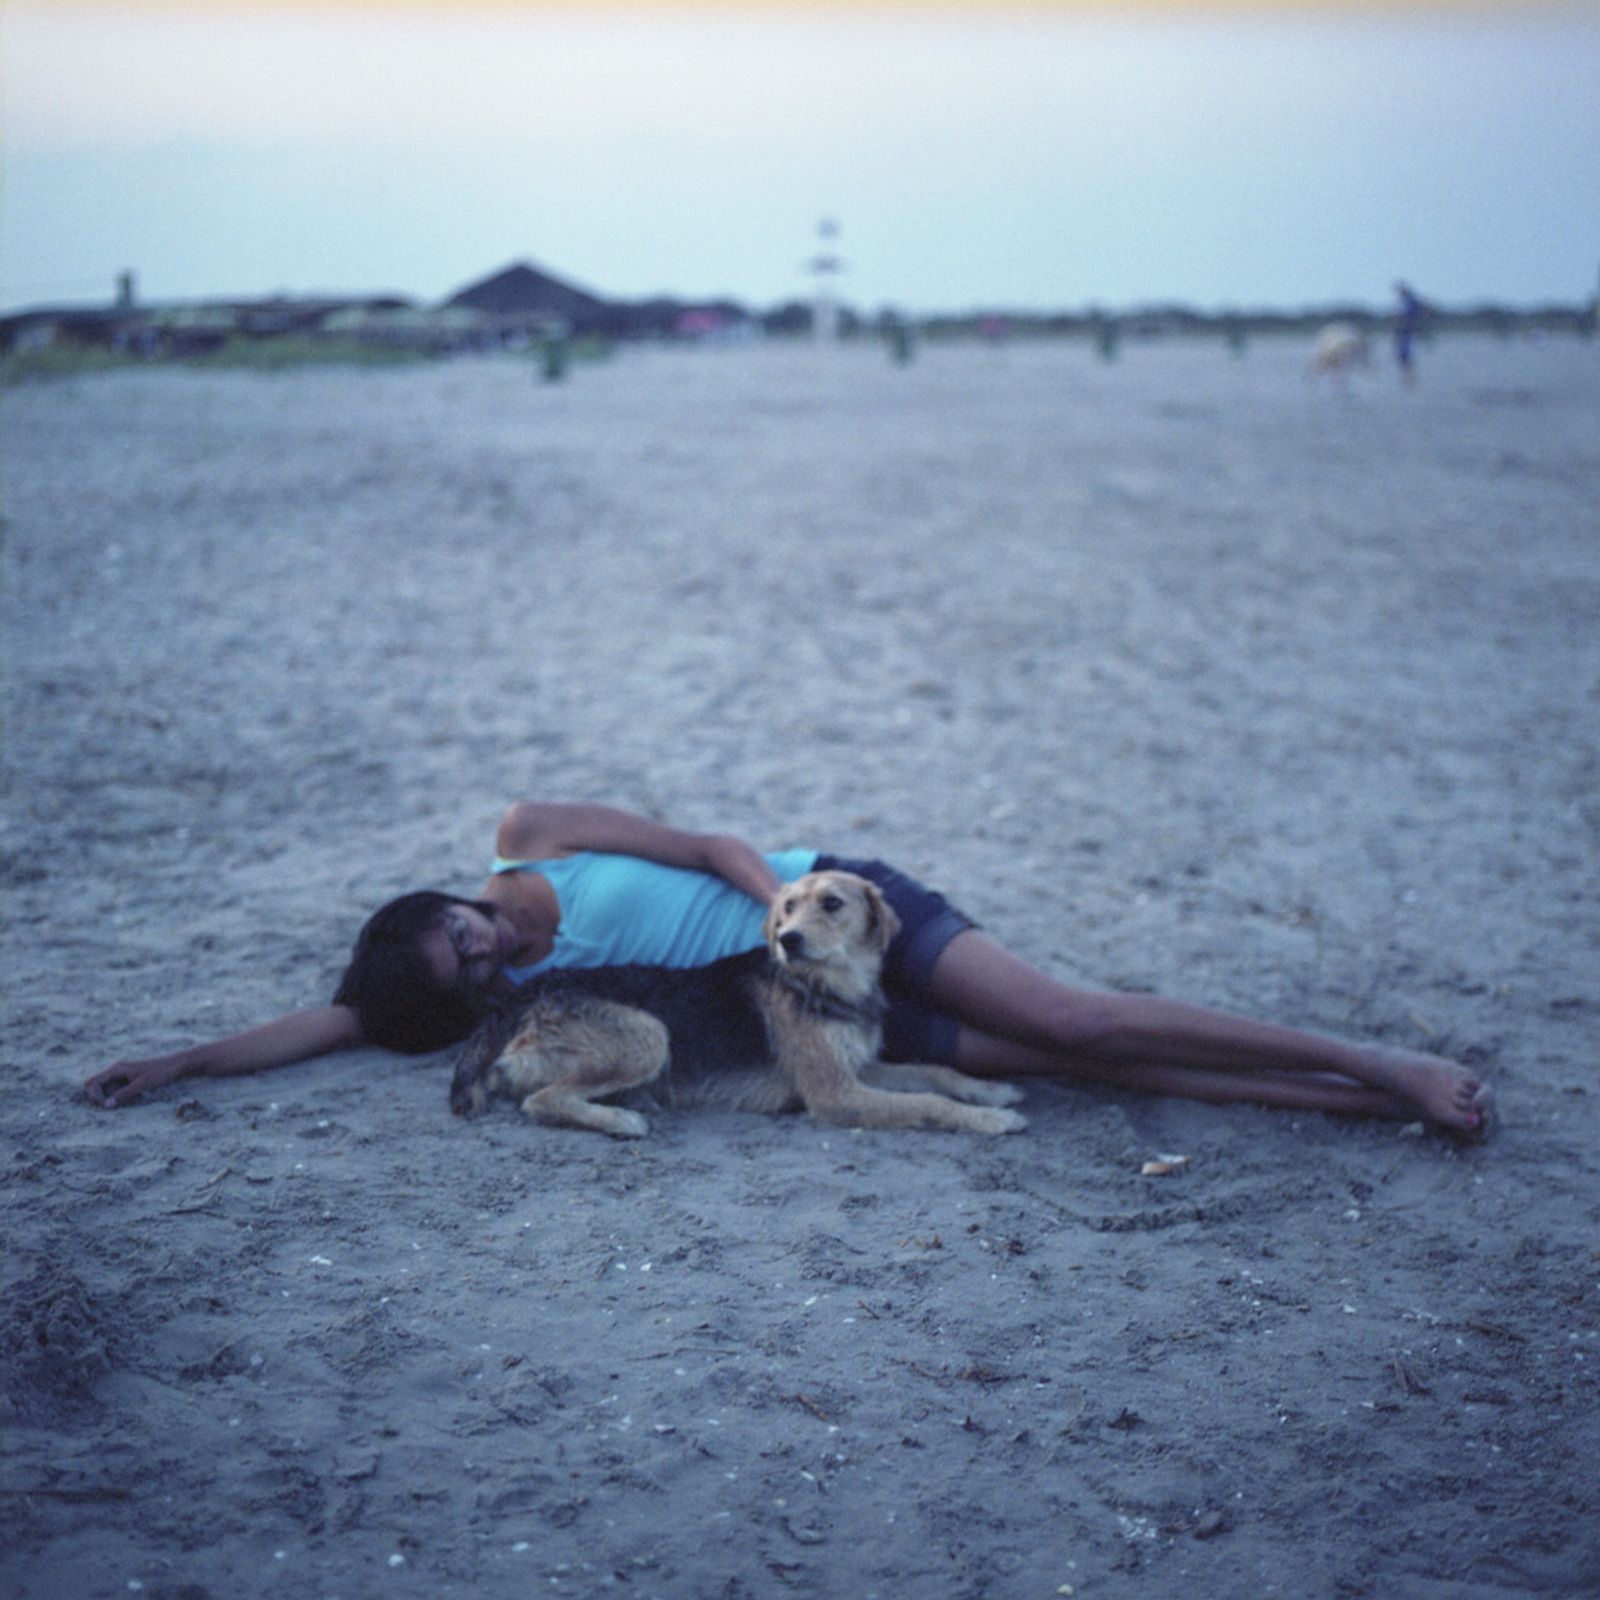 © Chiara Fossati - Jesse, 19 years old, and a stray dog on the beach of Sulina, Romania.